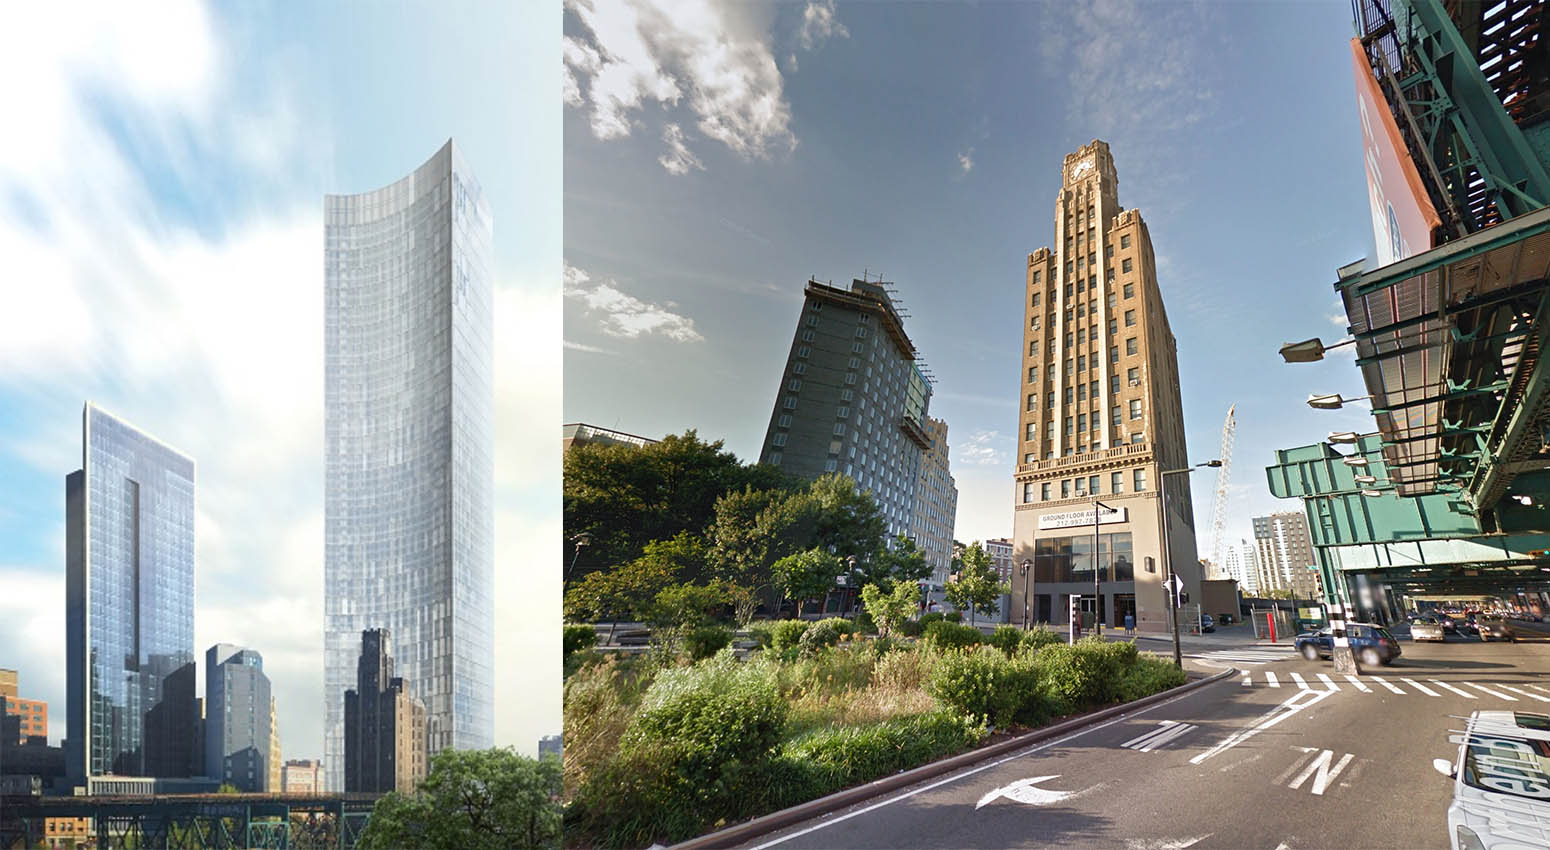 Queens Plaza Park, rendering courtesy the Durst Organization (left) and Long Island City Clock Tower, via Google Maps (right)